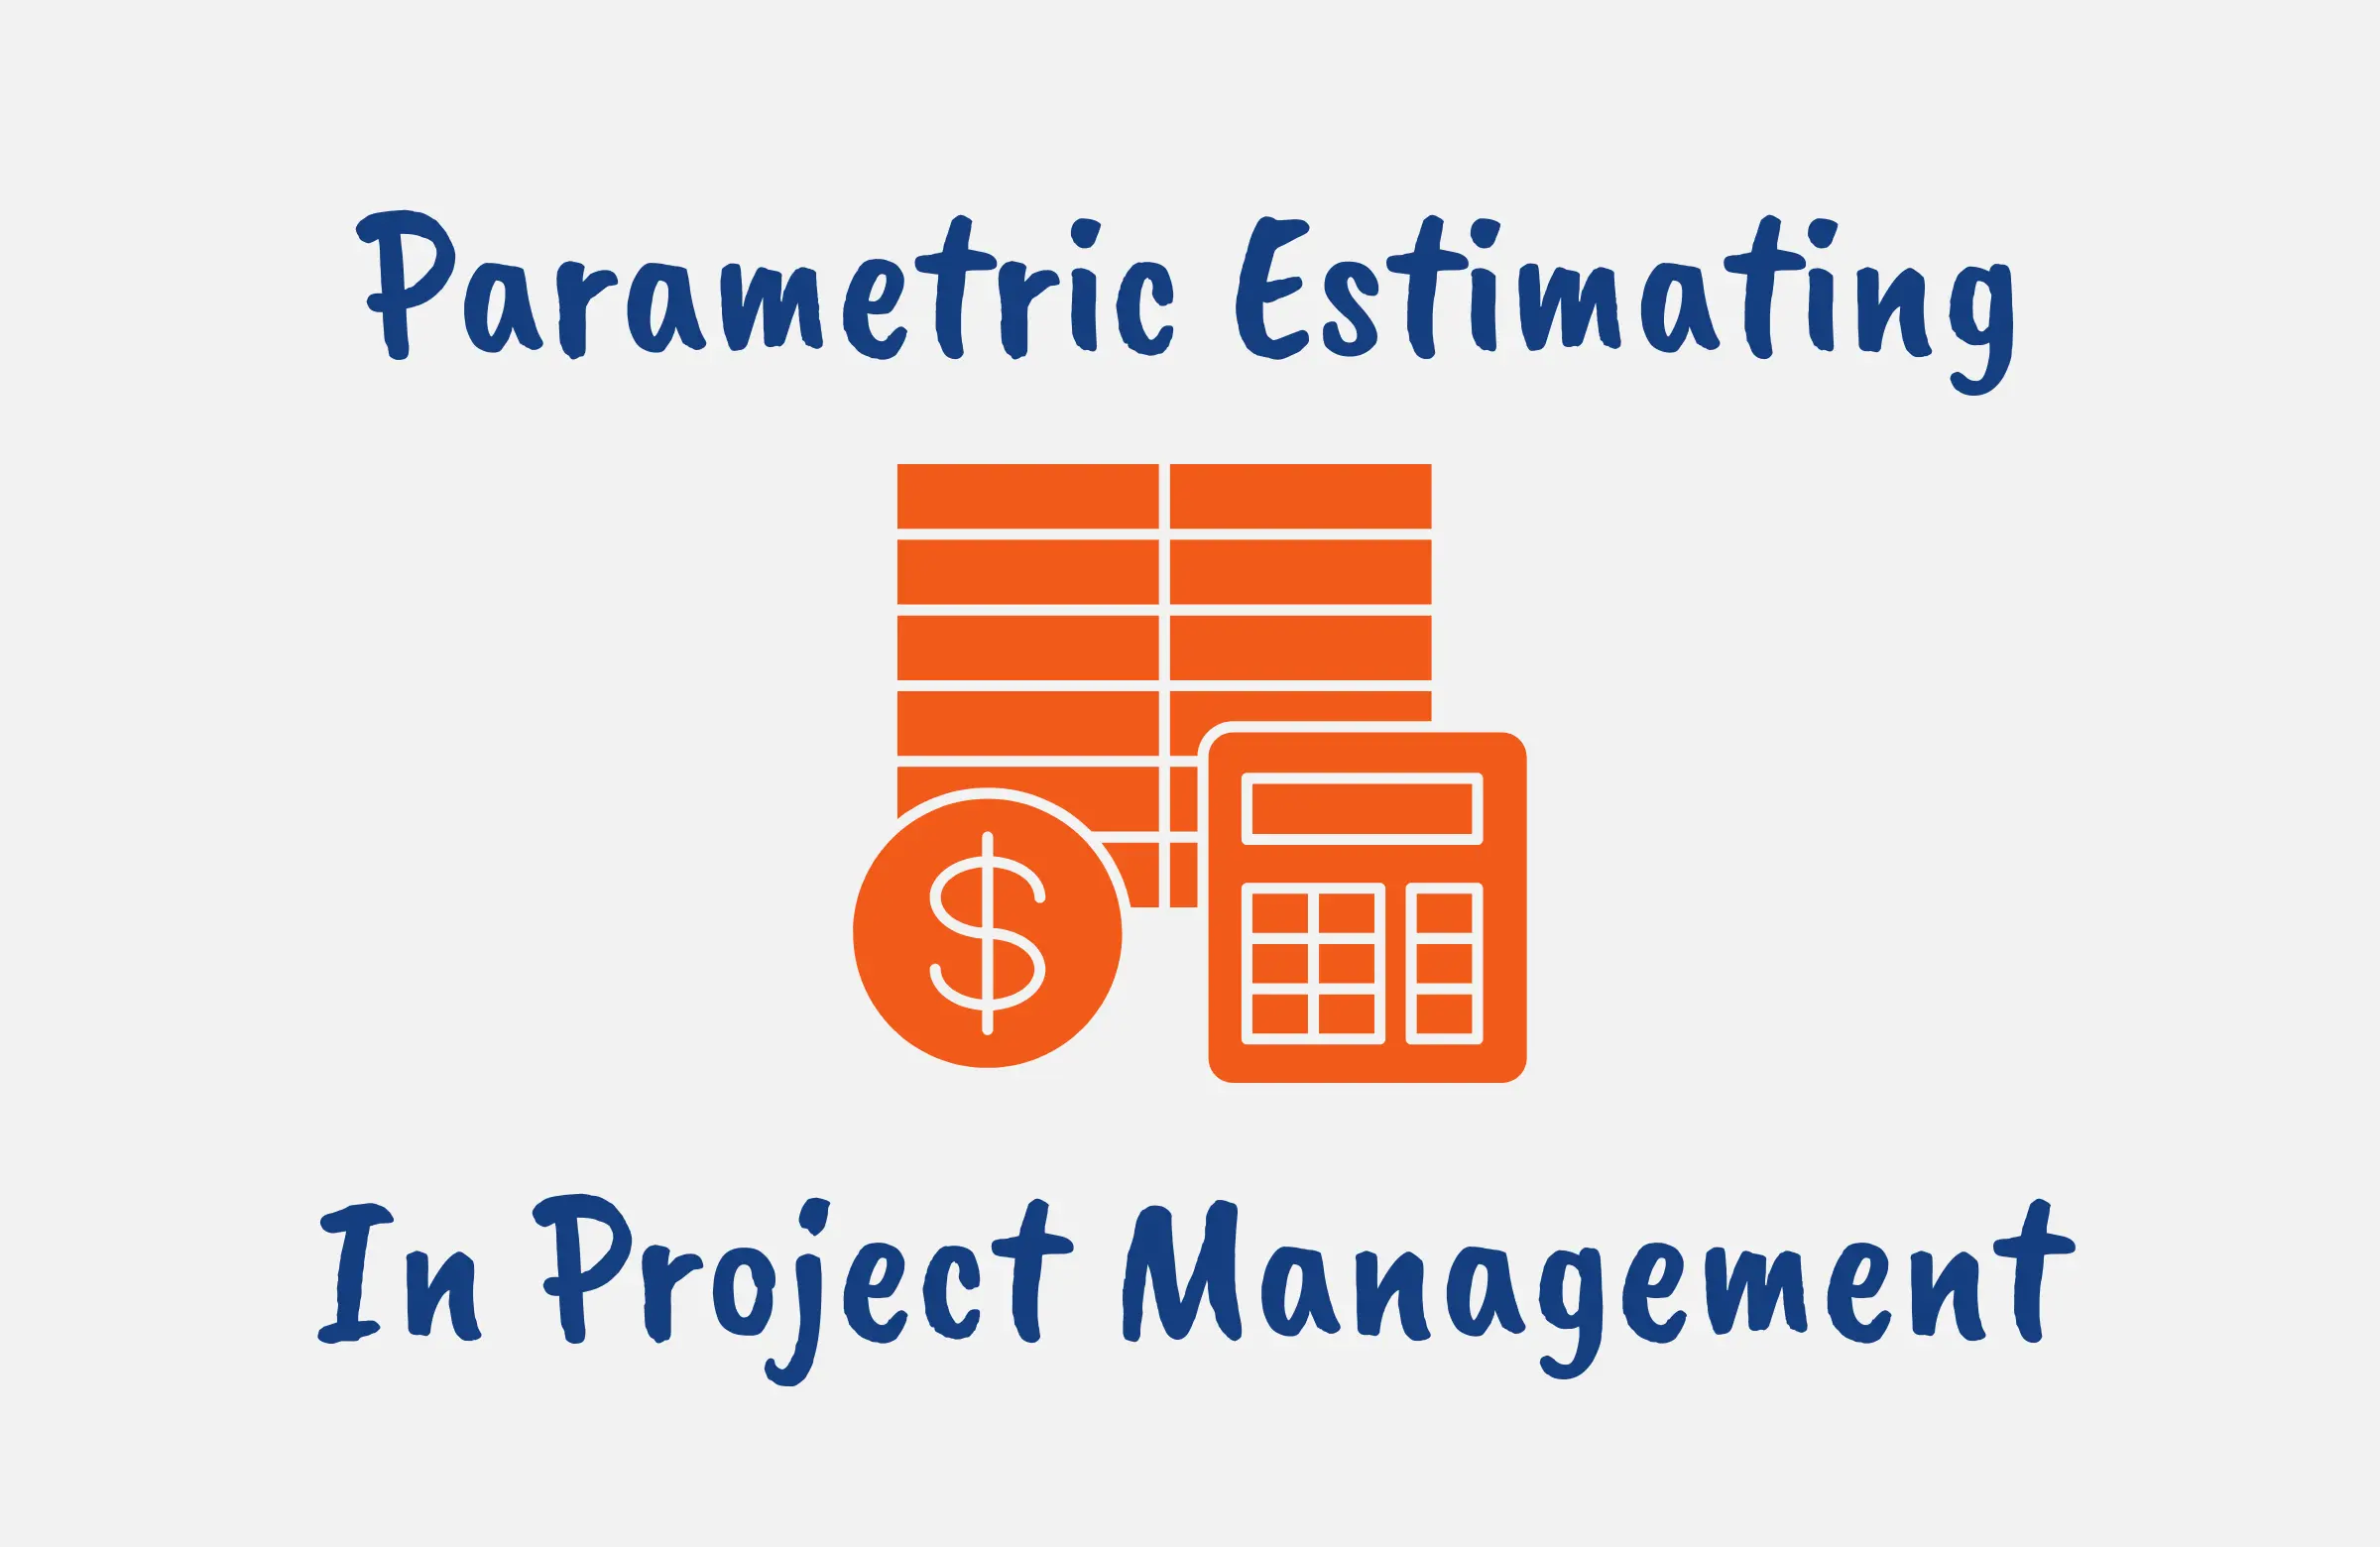 What is Parametric Estimating in Project Management